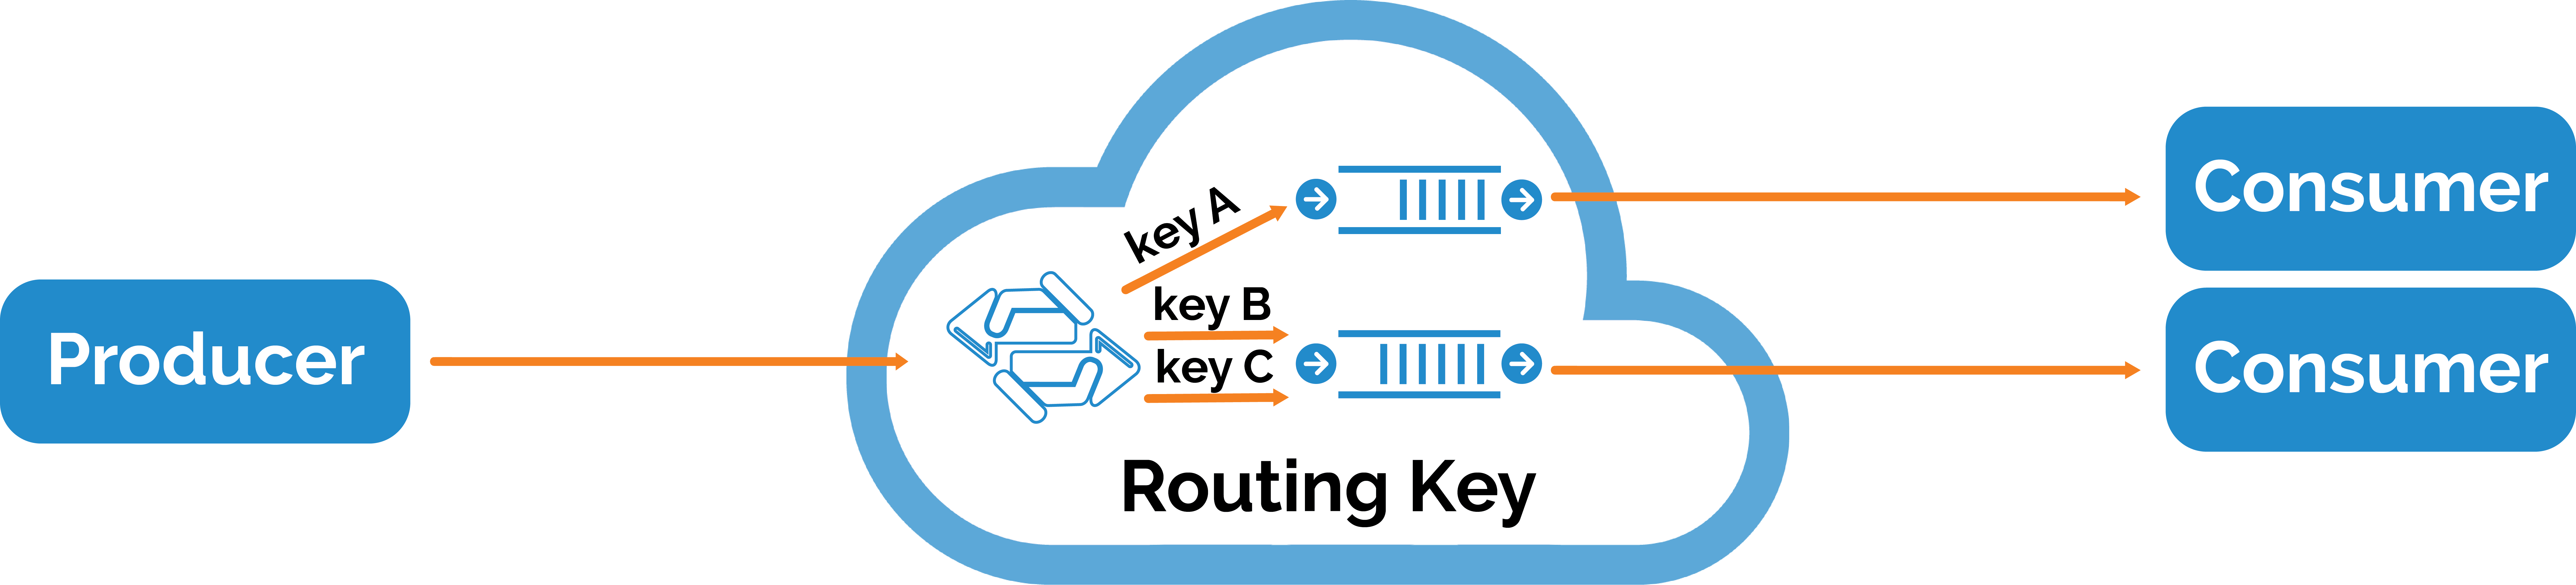 Diagram of Routing - Key based messaging